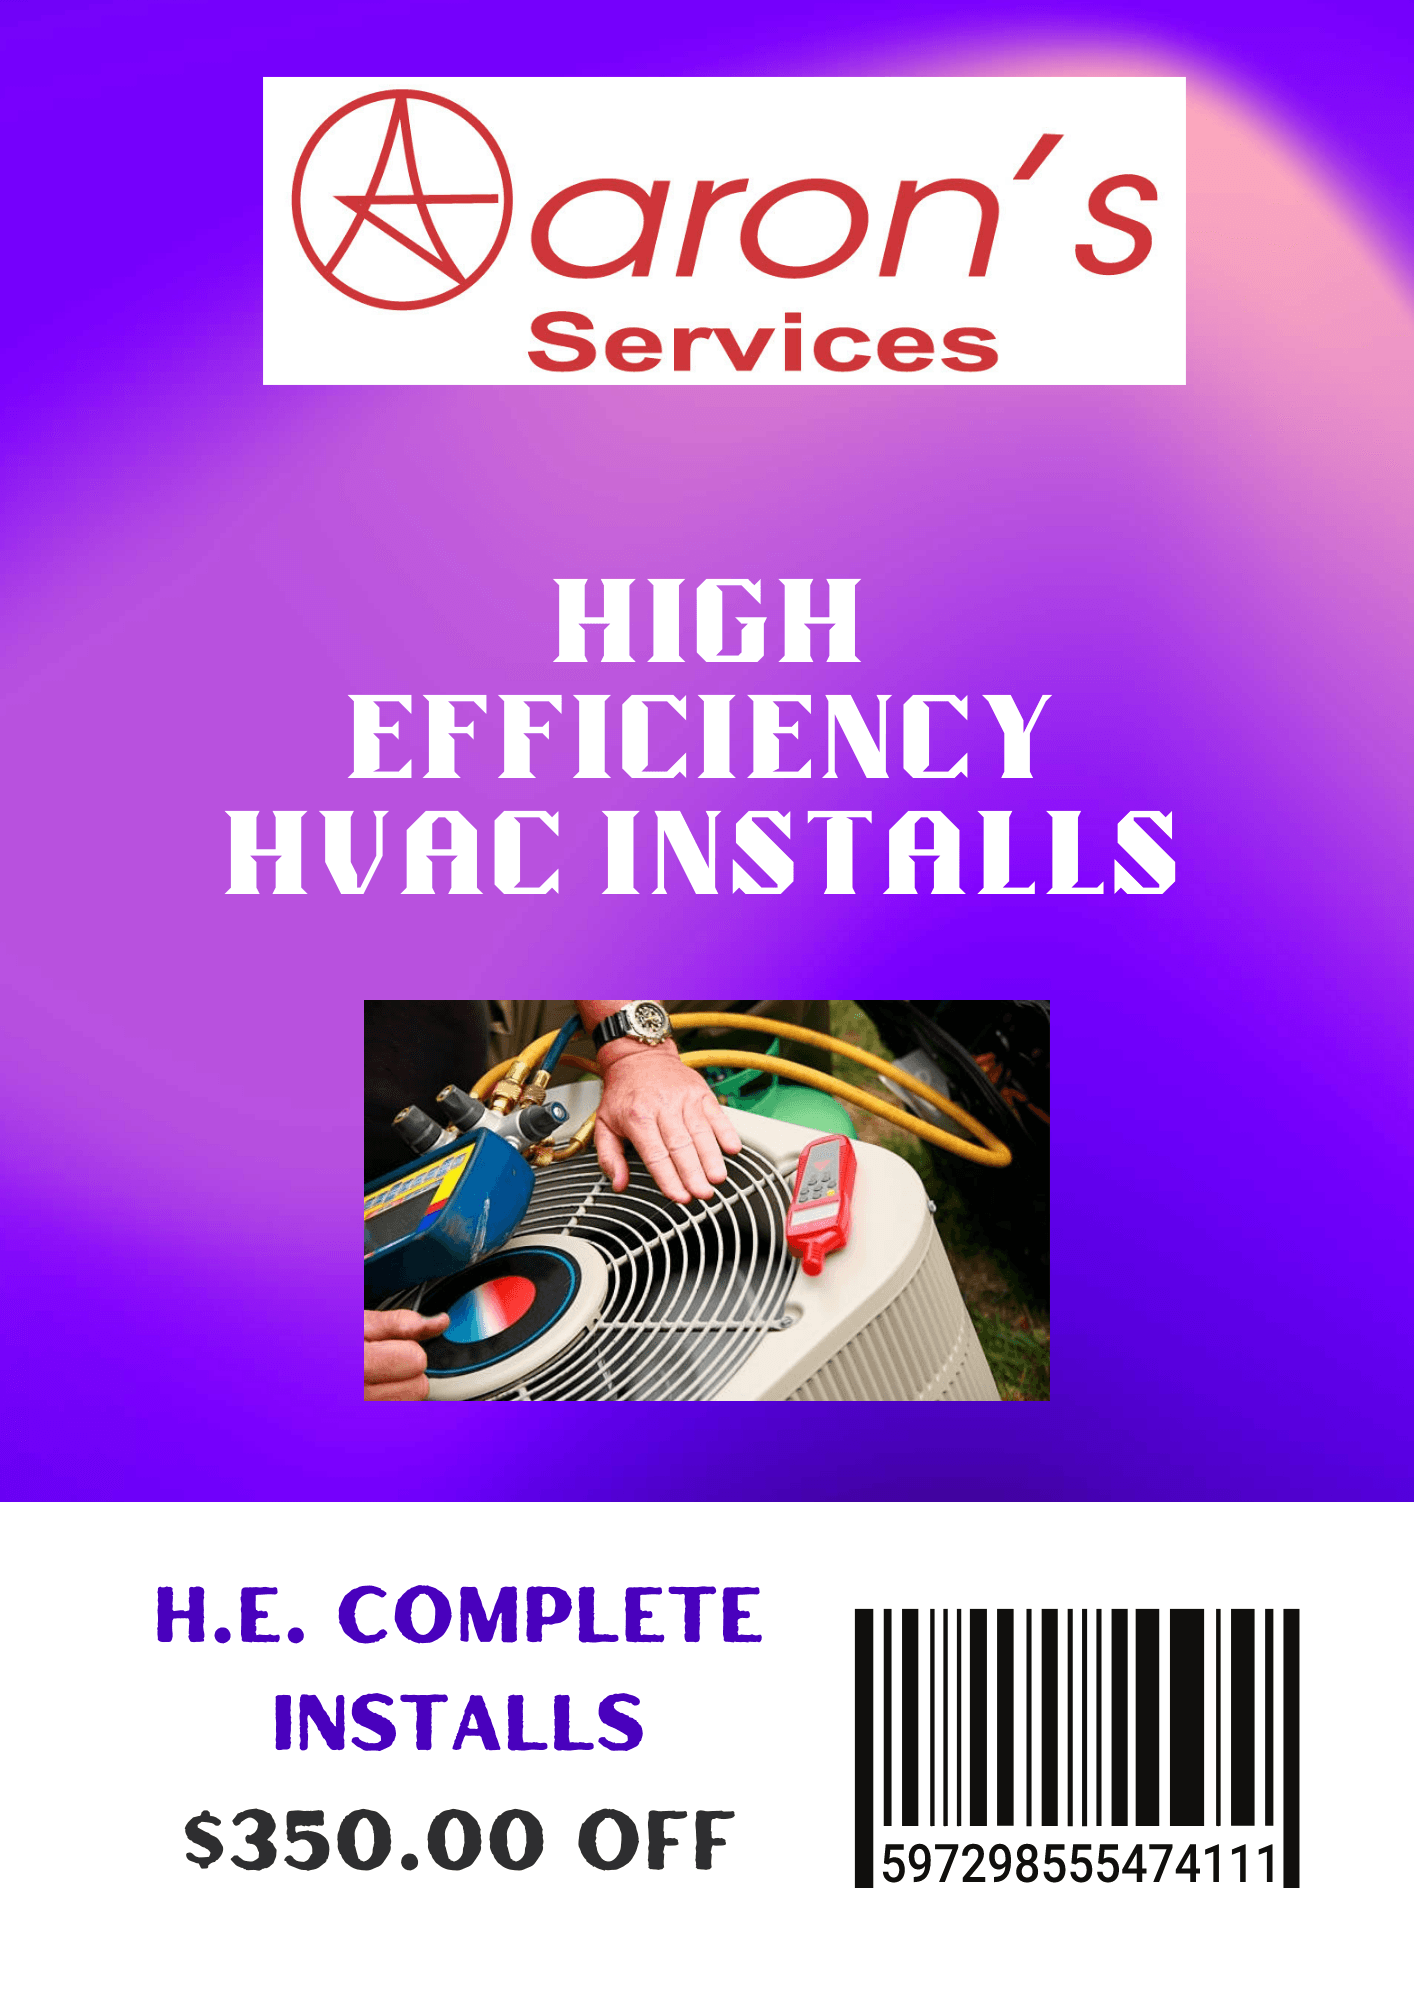 Aaron's High Efficiency HVAC Install Coupon